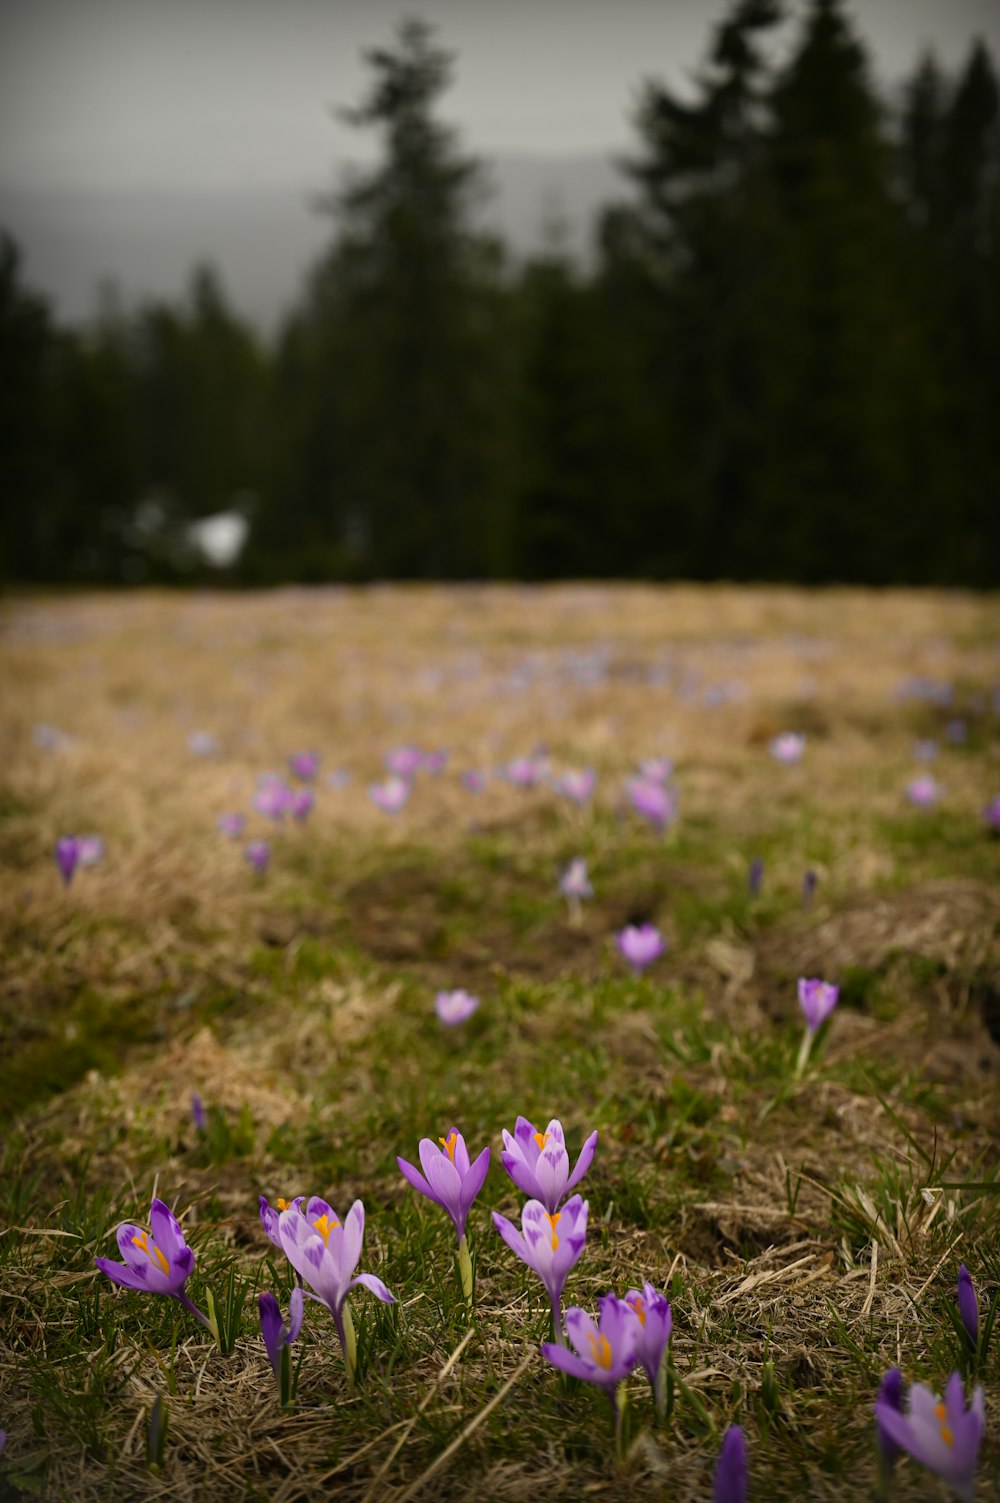 a field full of purple flowers with trees in the background